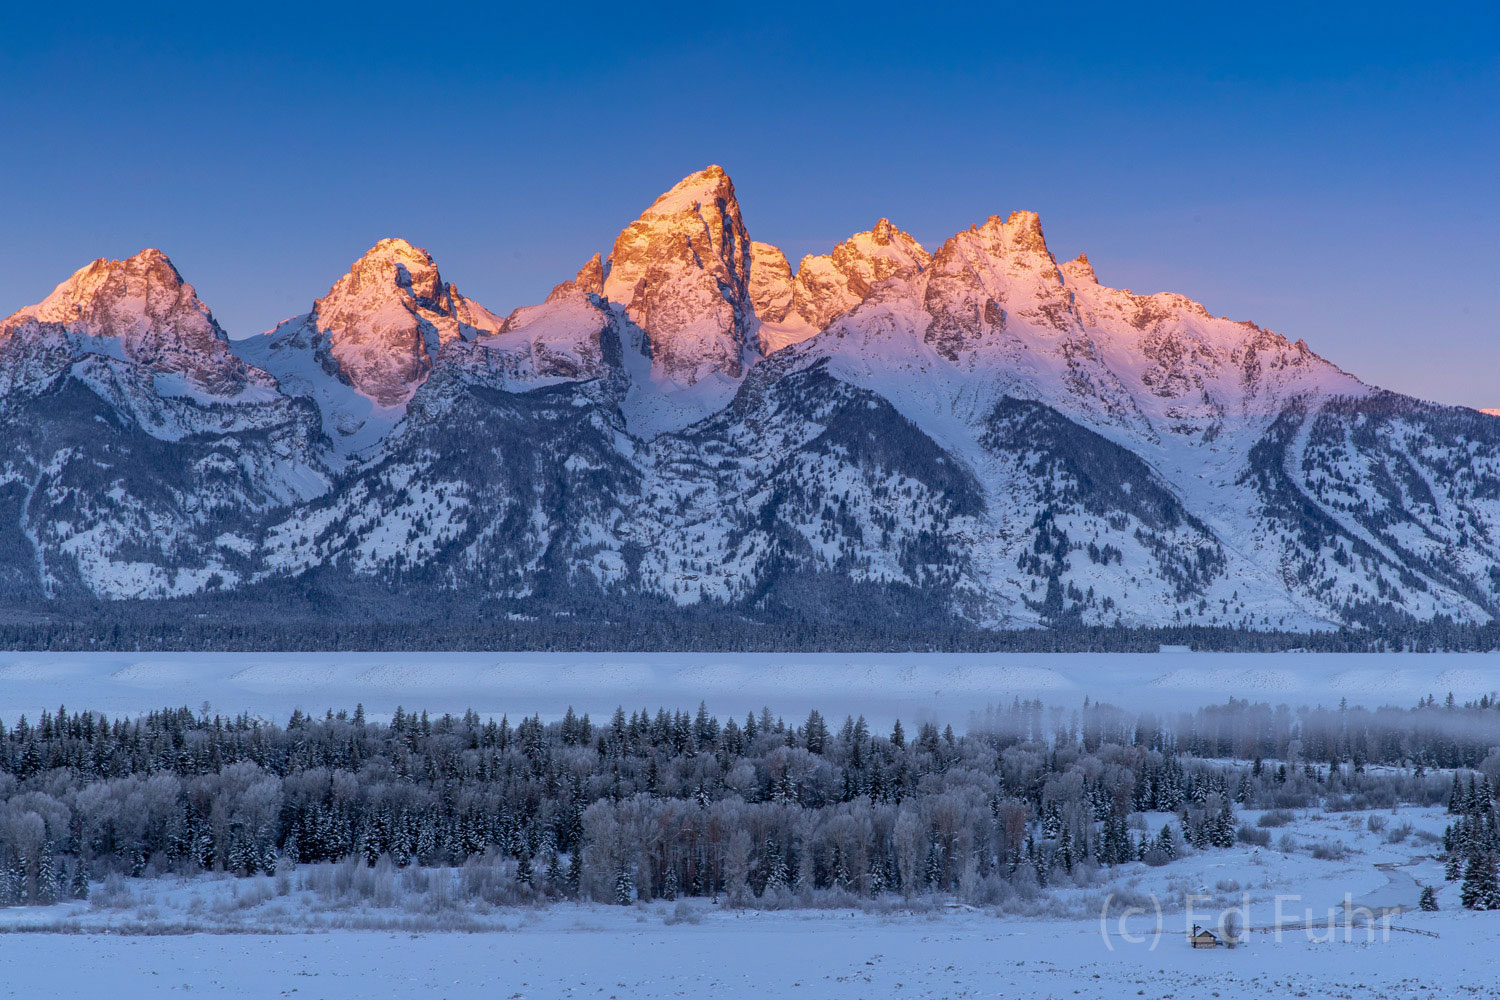 In a matter of just a few minutes, the rising sun has elevated enough to light half the Teton range.